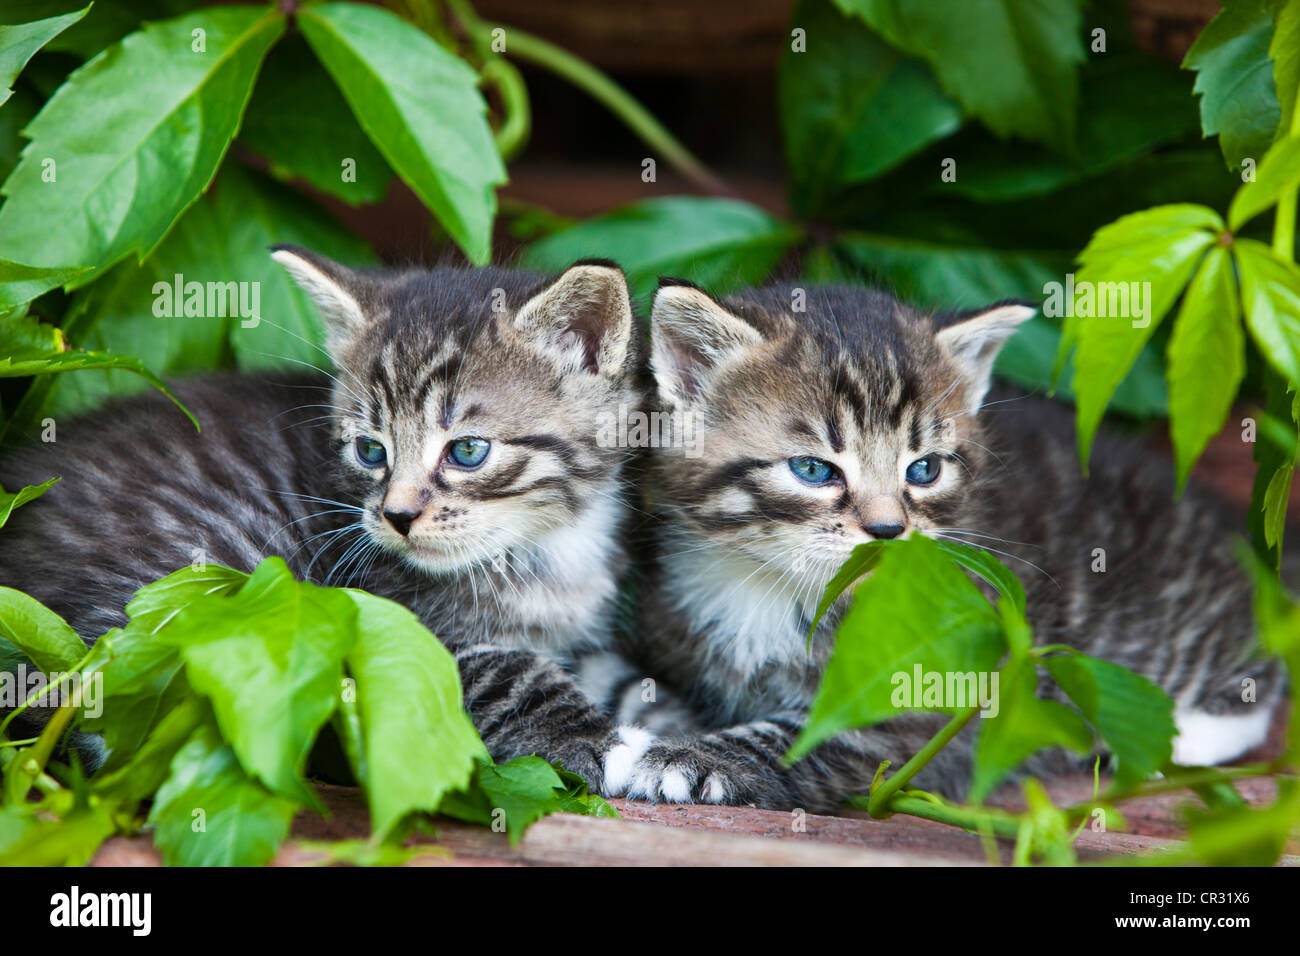 Two grey tabby domestic cats, kittens, North Tyrol, Austria, Europe Stock Photo